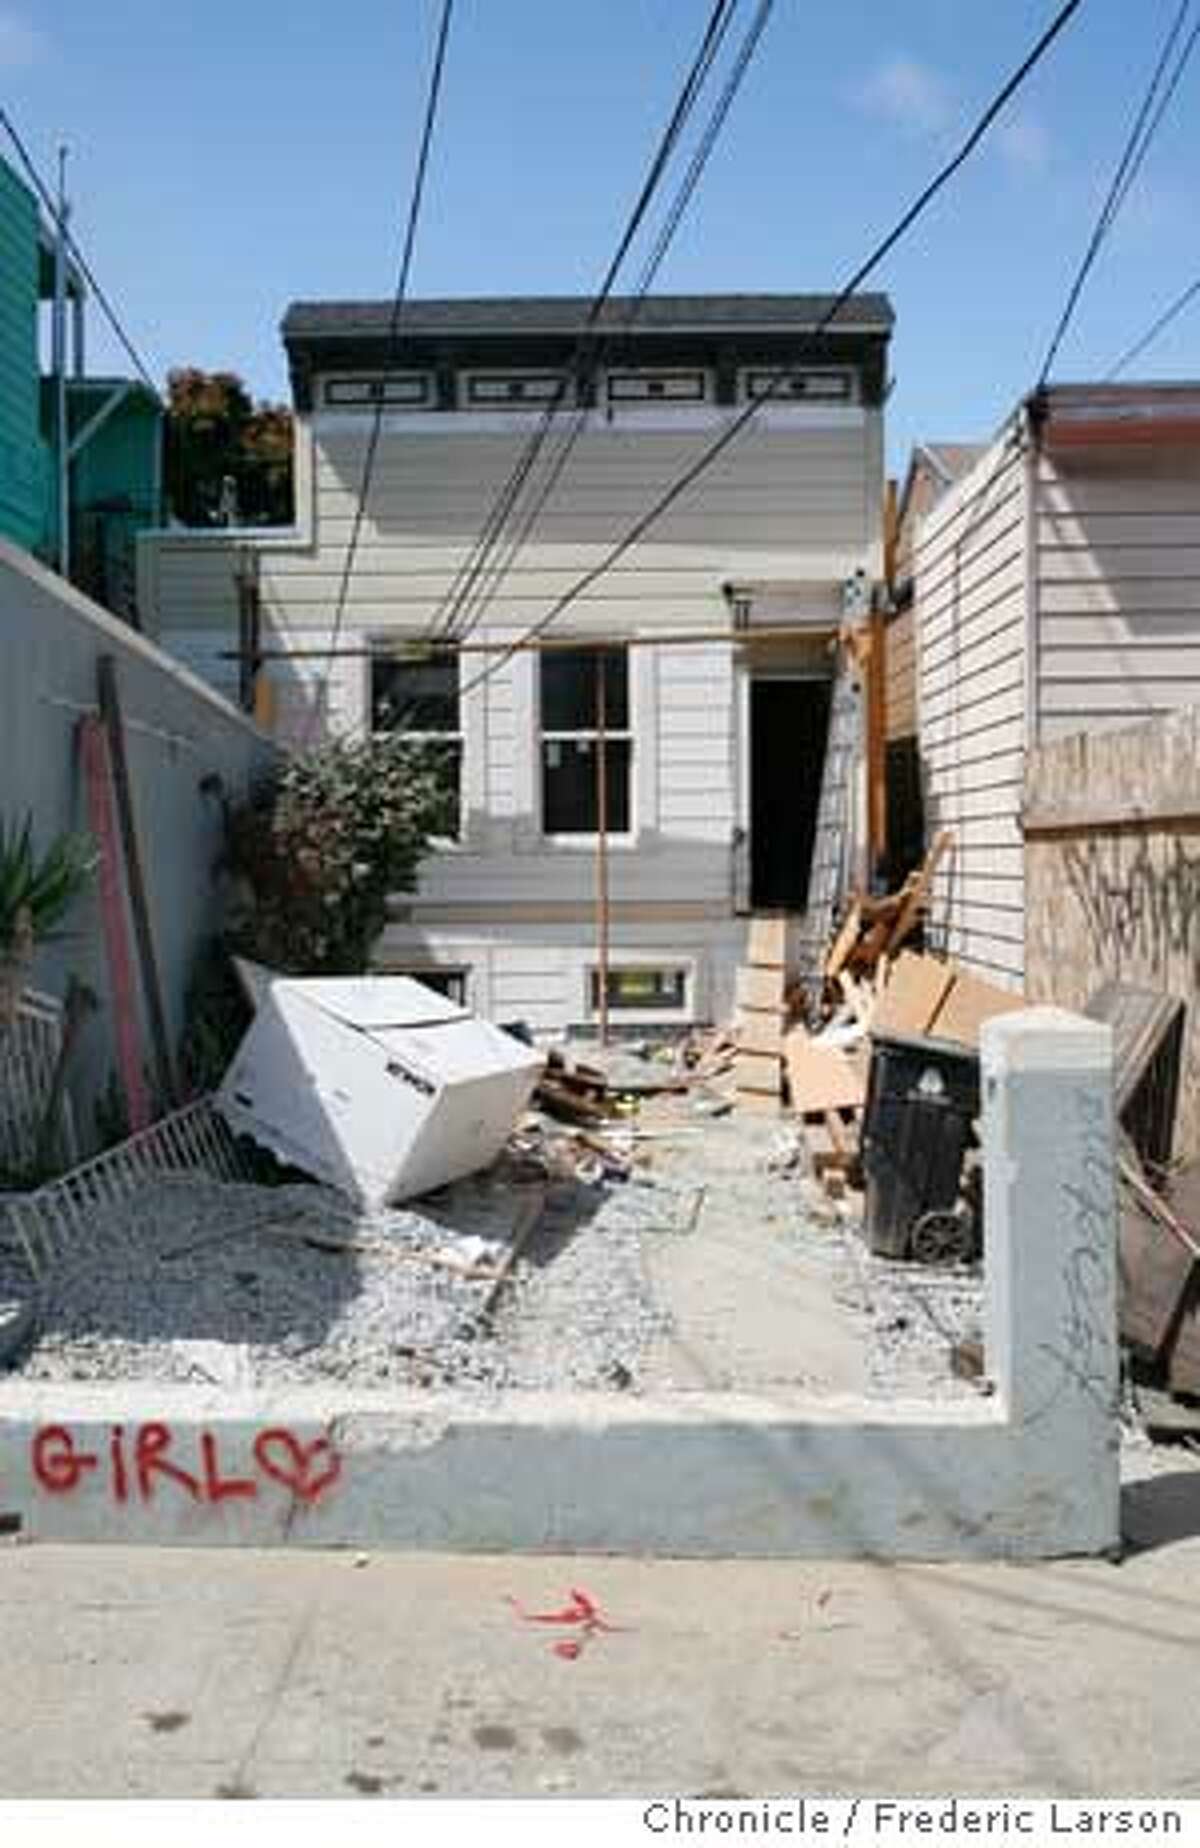 Construction being done on Leo McFadden's home at 838 Alabama Street in the Mission. San Francisco city building inspector Leo McFadden's real estate dealings have been a focus of the district attorney's corruption investigation. **Leo McFadden 8/18/06 {Frederic Larson/The Chronicle} Ran on: 08-22-2006 A remodel on Alabama Street is part of a probe of a city agency. Ran on: 08-22-2006 A remodel on Alabama Street is part of a probe of a city agency. Ran on: 08-22-2006 Ran on: 08-22-2006 Ran on: 08-22-2006